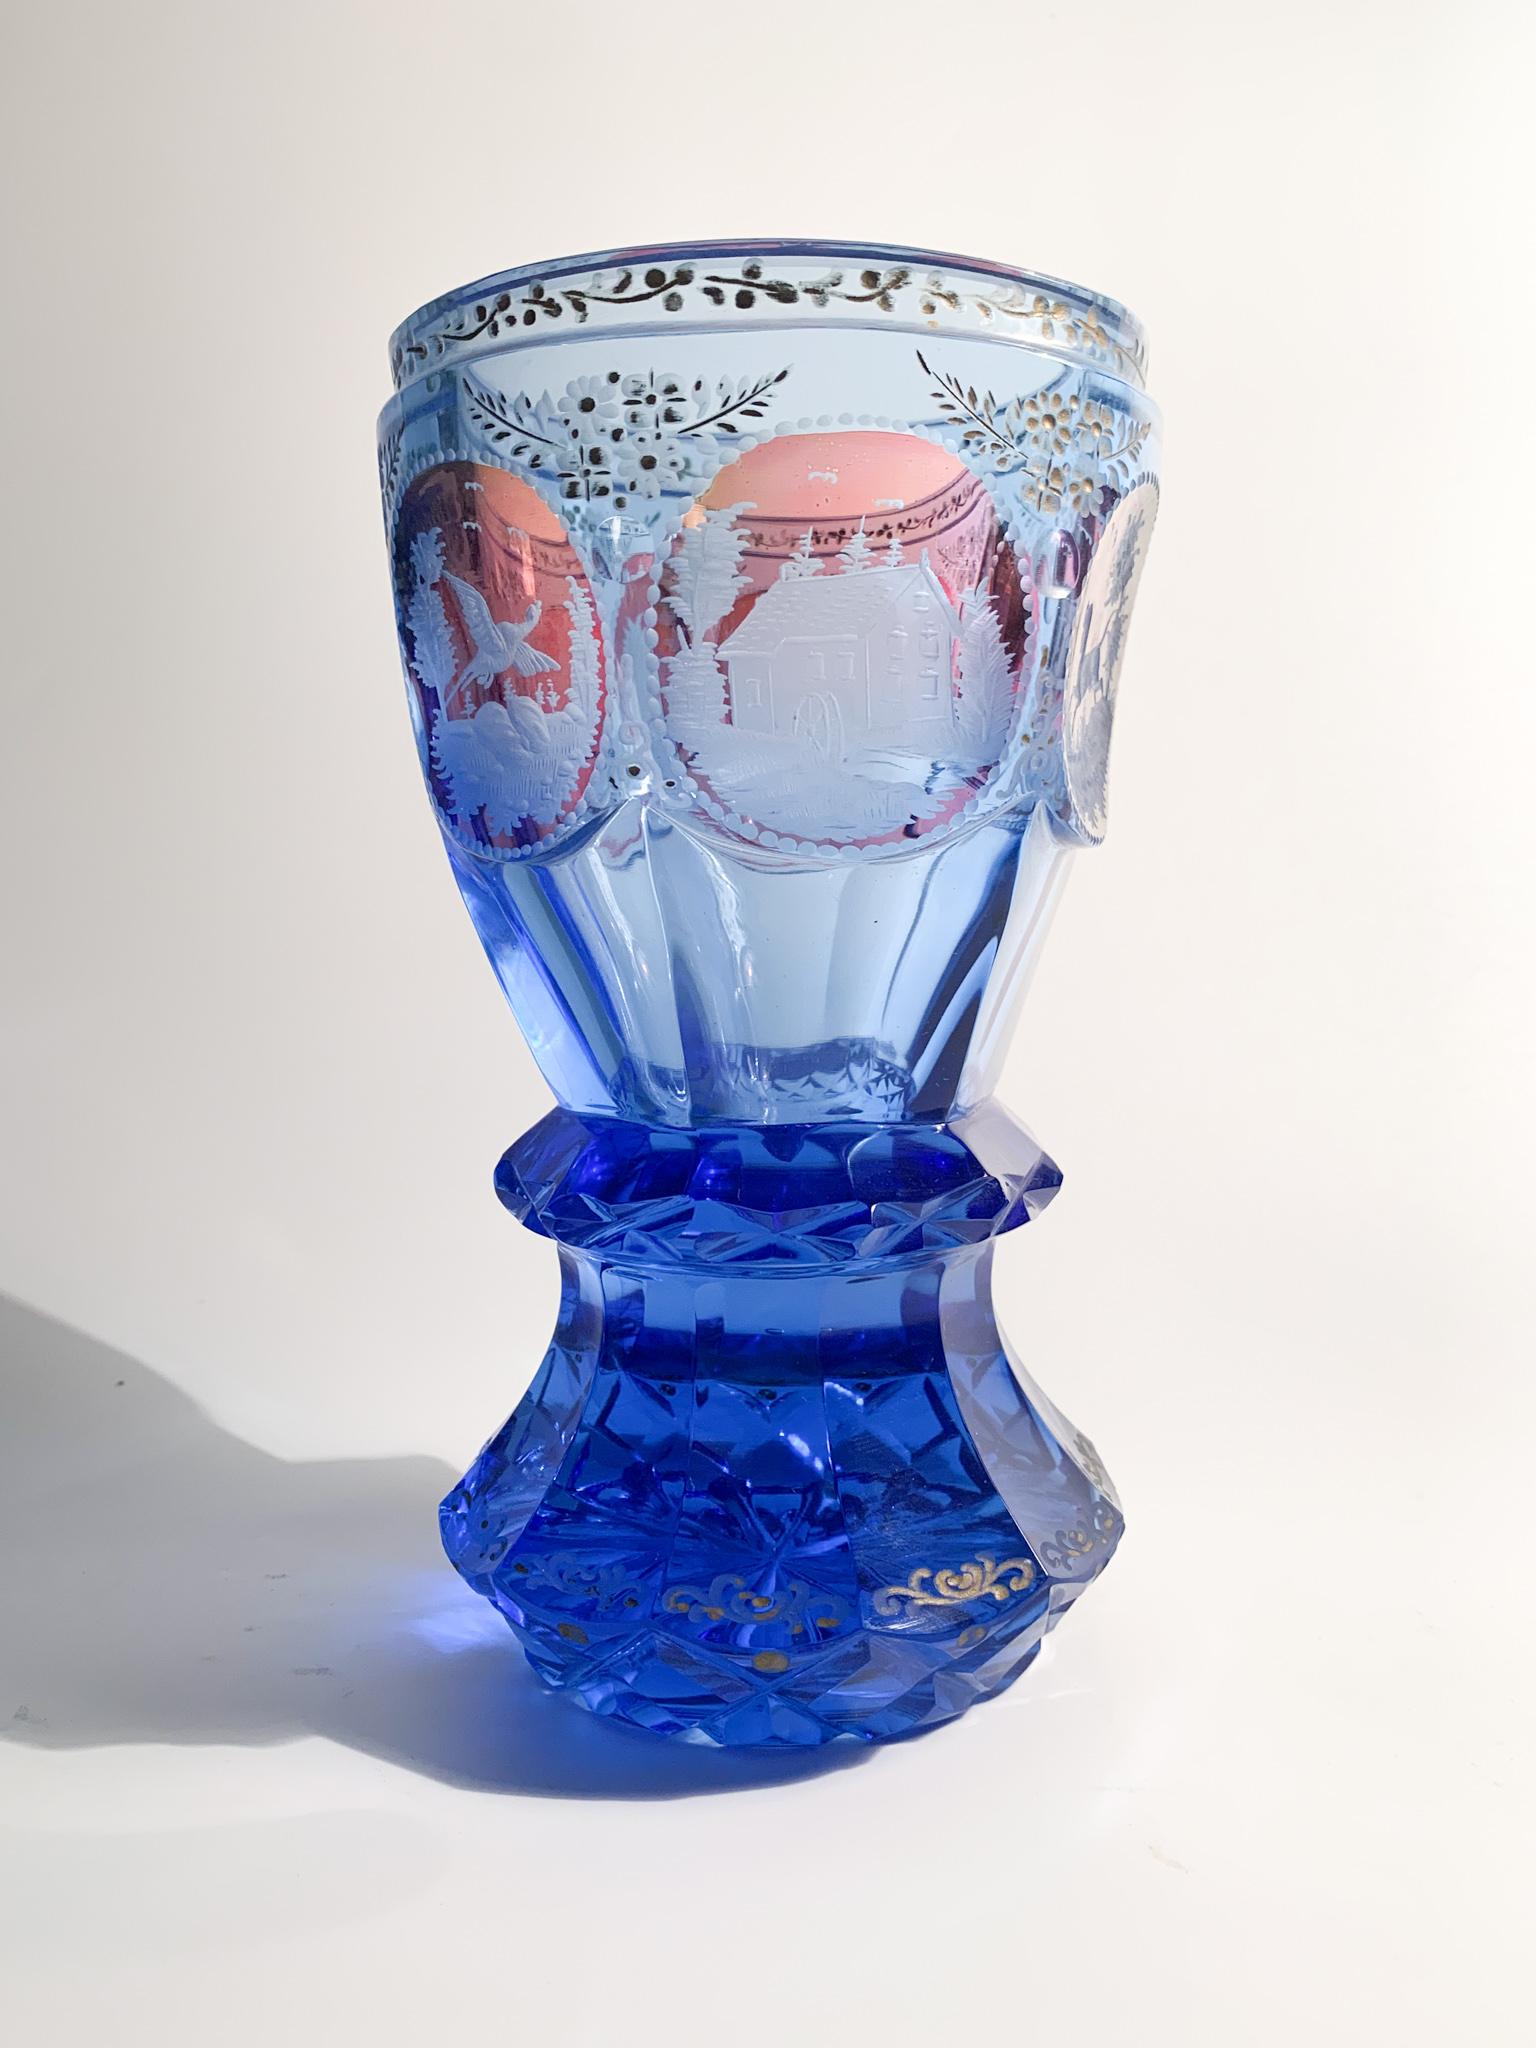 Blue Biedermeier Crystal Glass with Acid Decorations from the 1800s 3